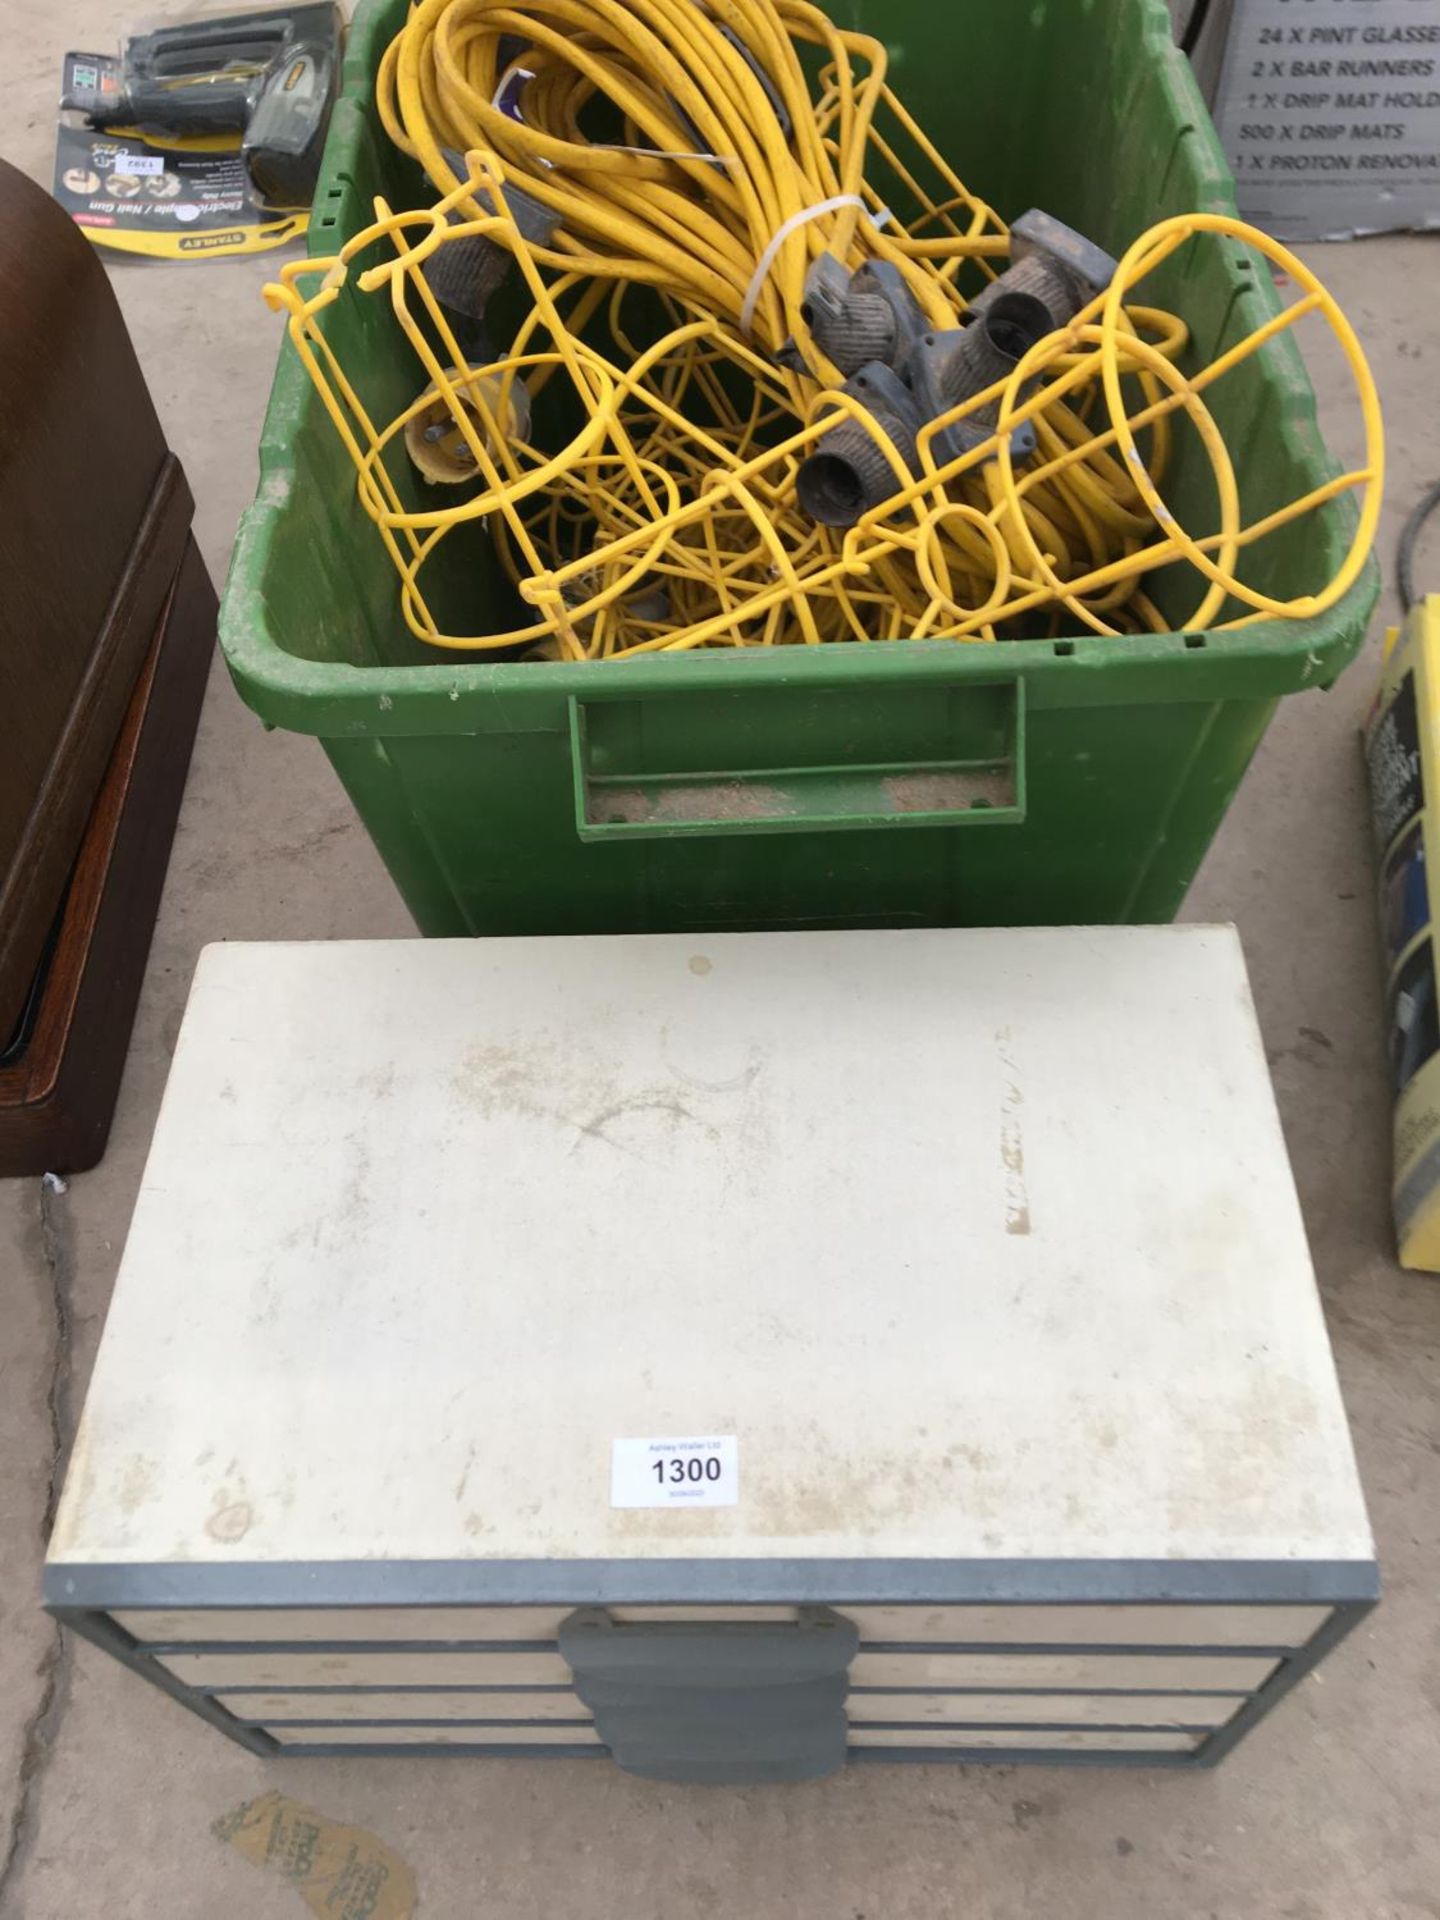 A SMALL SET OF WOODEN DRAWERS AND A BOX OF YELLOW EXTENSION 110V LEADS FOR LIGHT FITTINGS ETC.